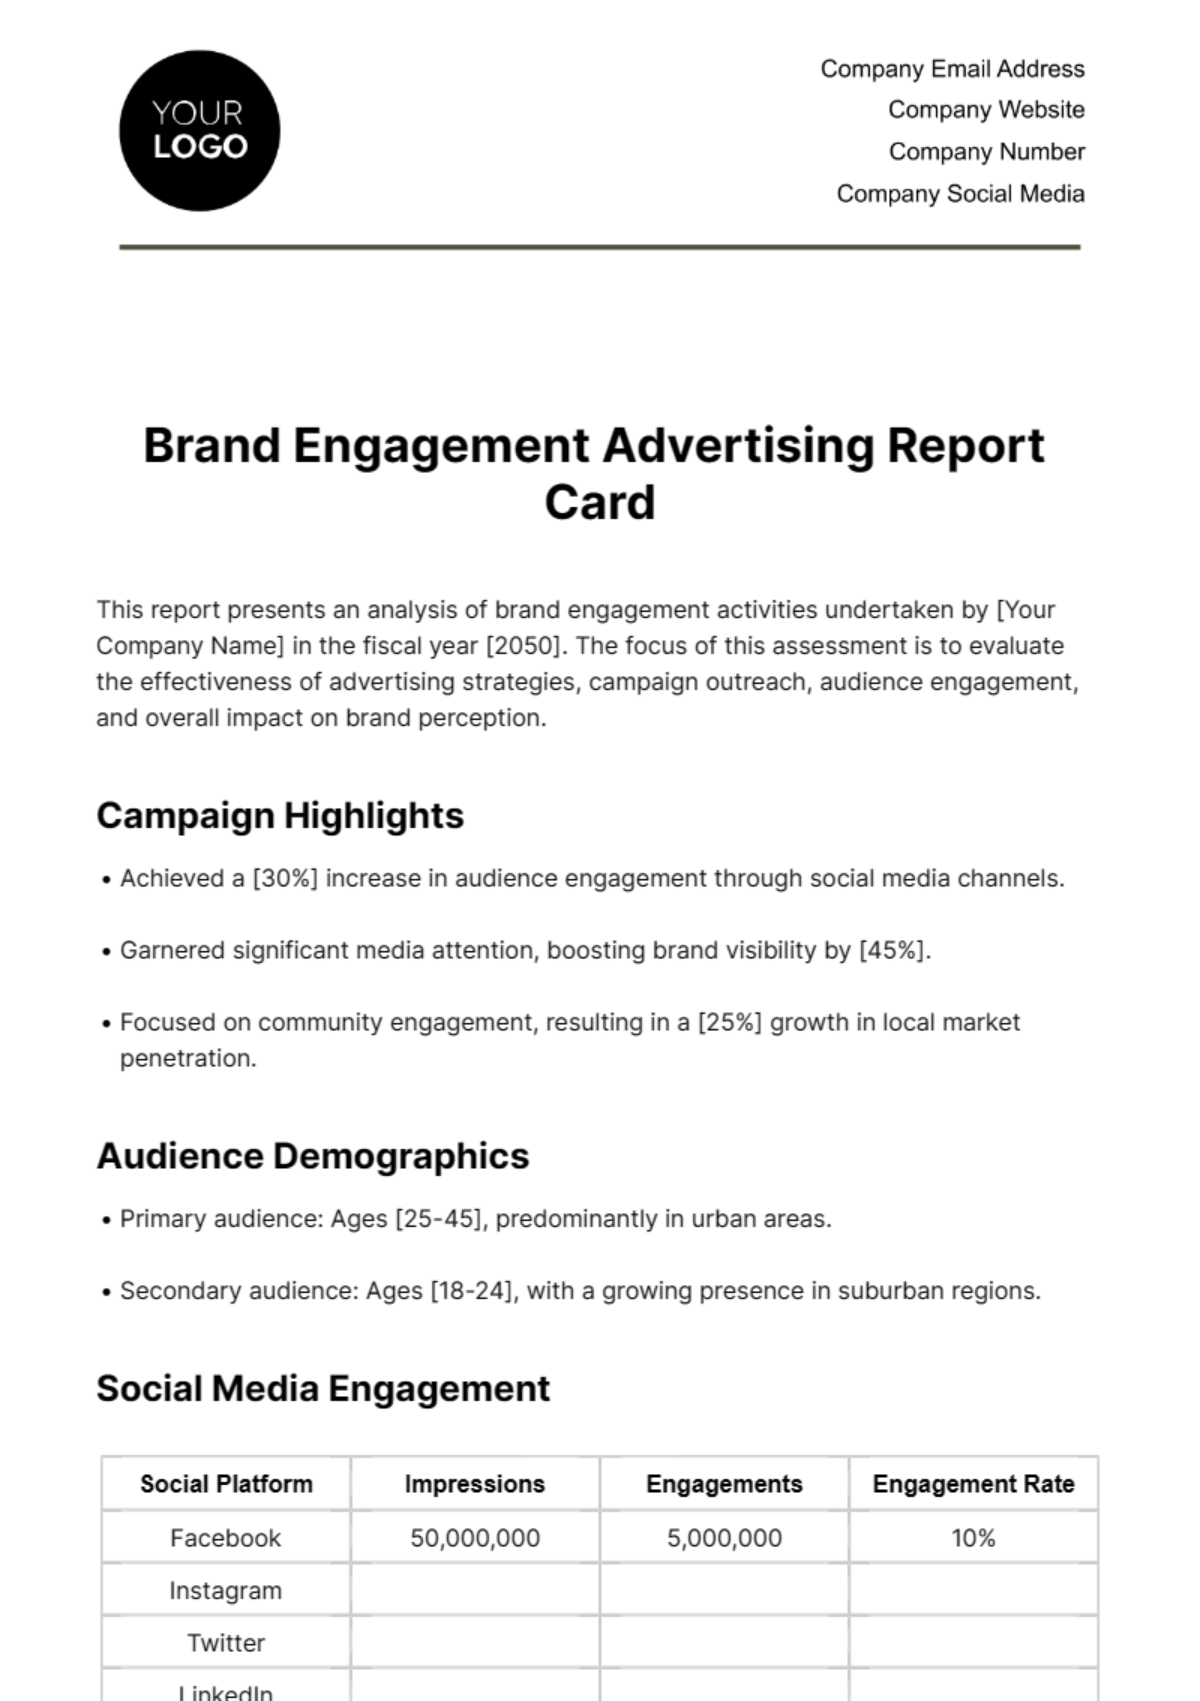 Brand Engagement Advertising Report Card Template